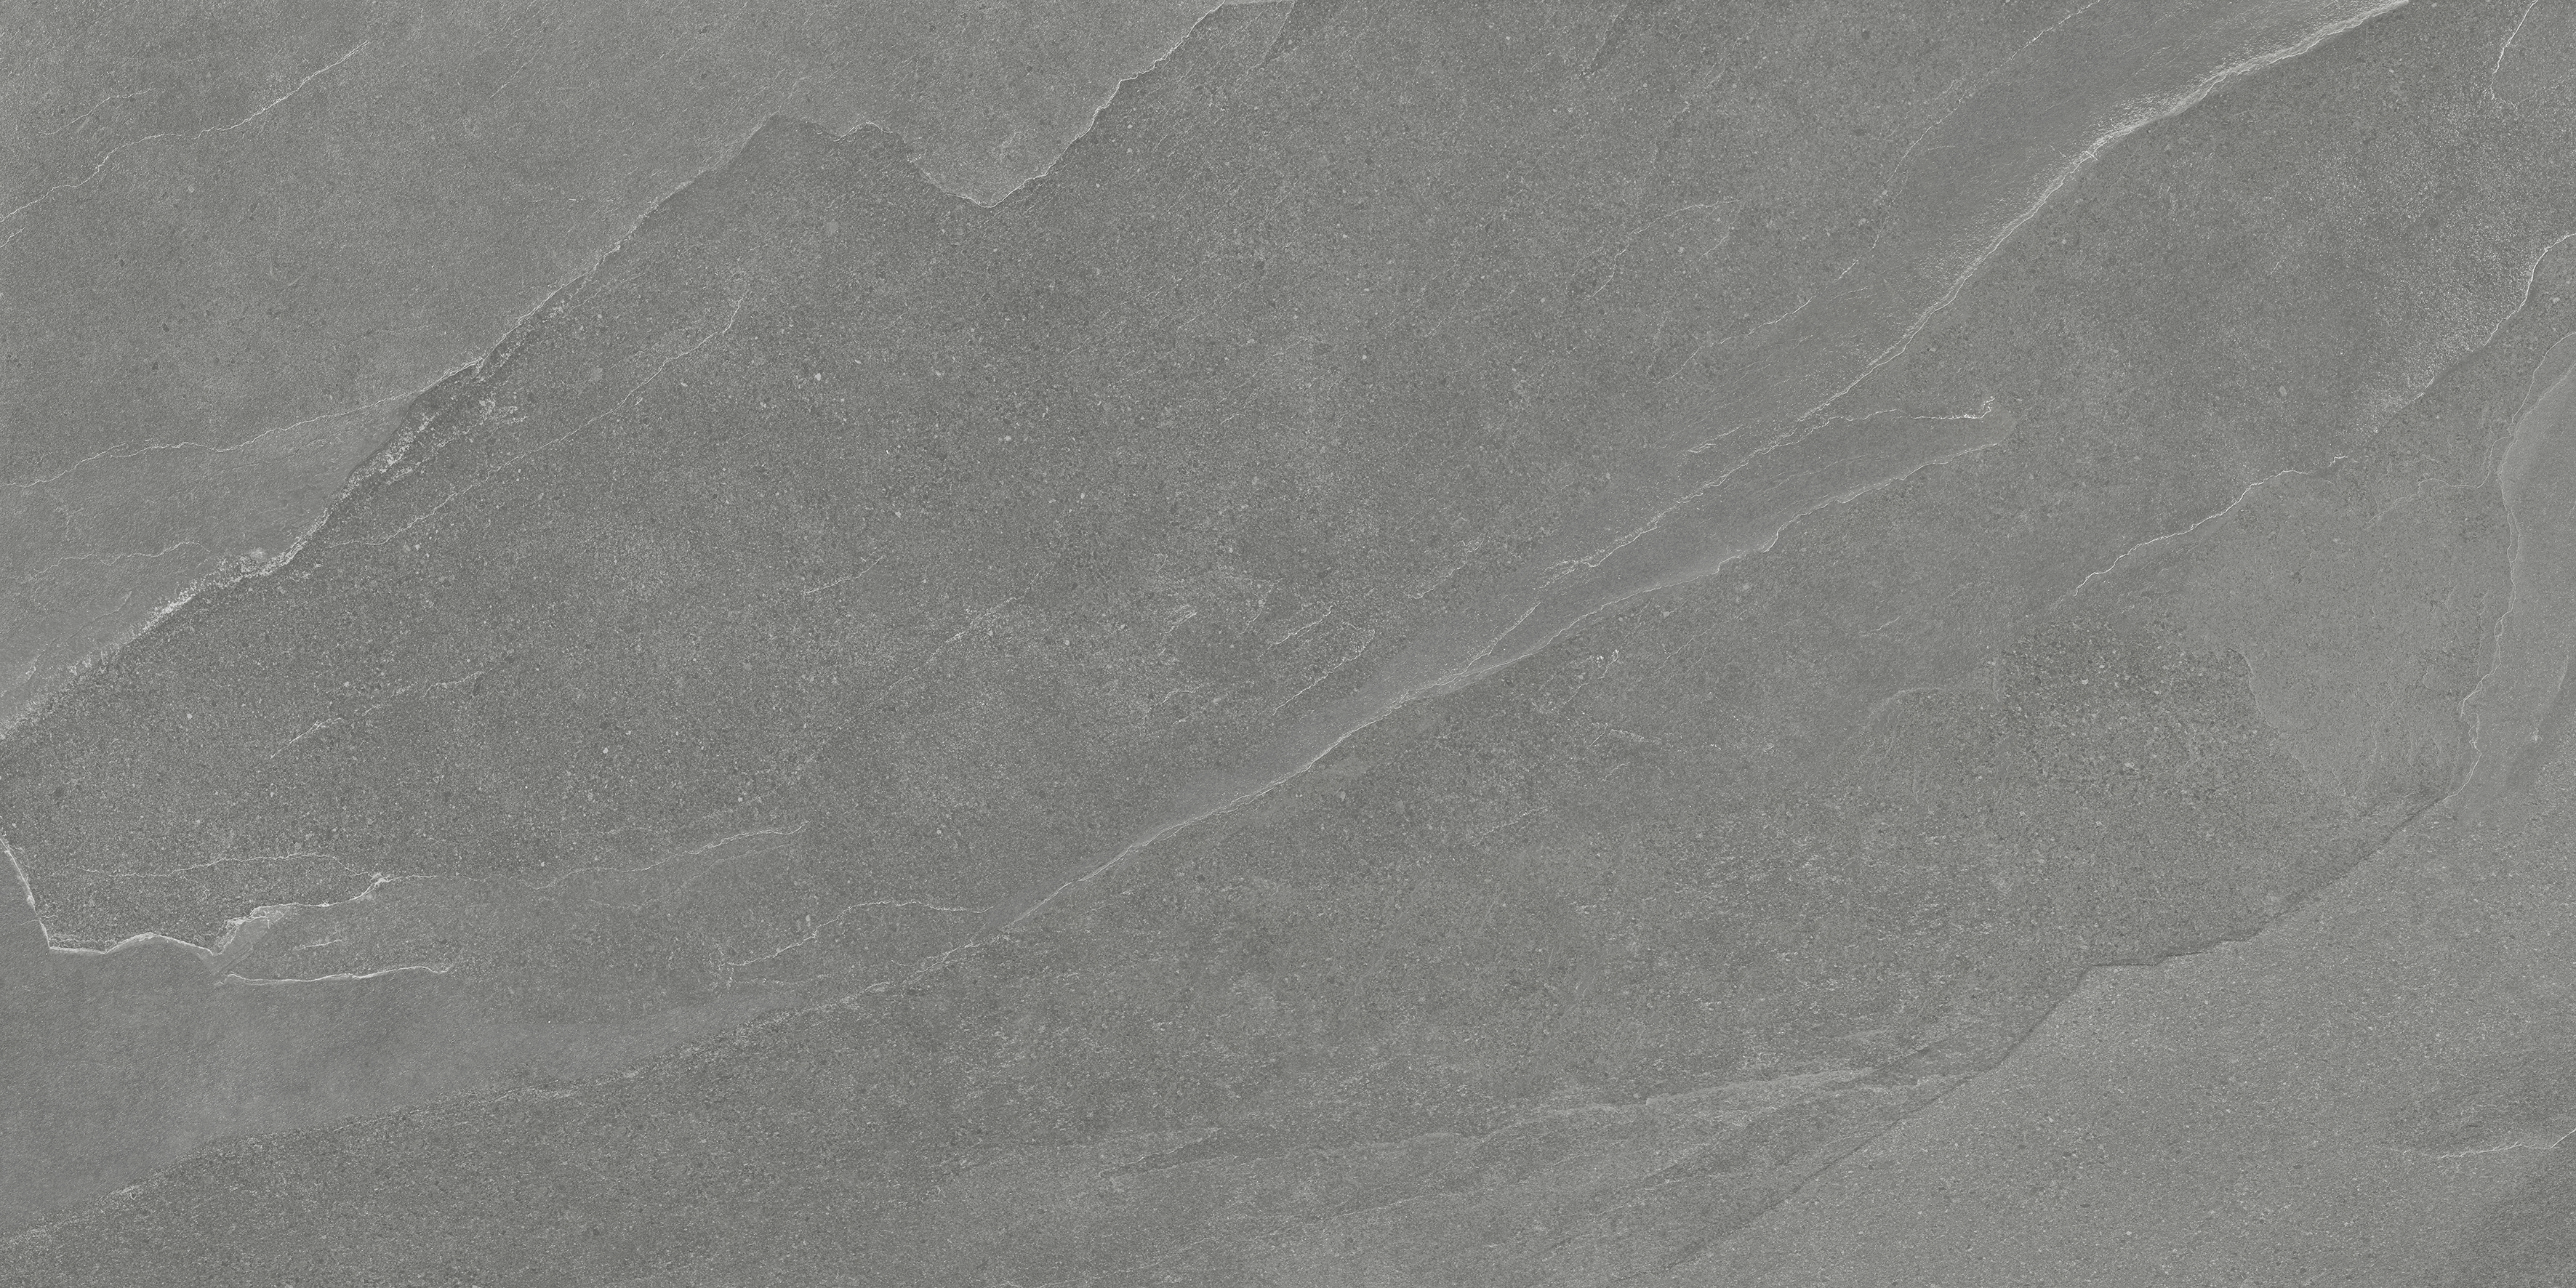 chromium pattern color body porcelain field tile from nord anatolia collection distributed by surface group international matte finish rectified edge 24x48 rectangle shape